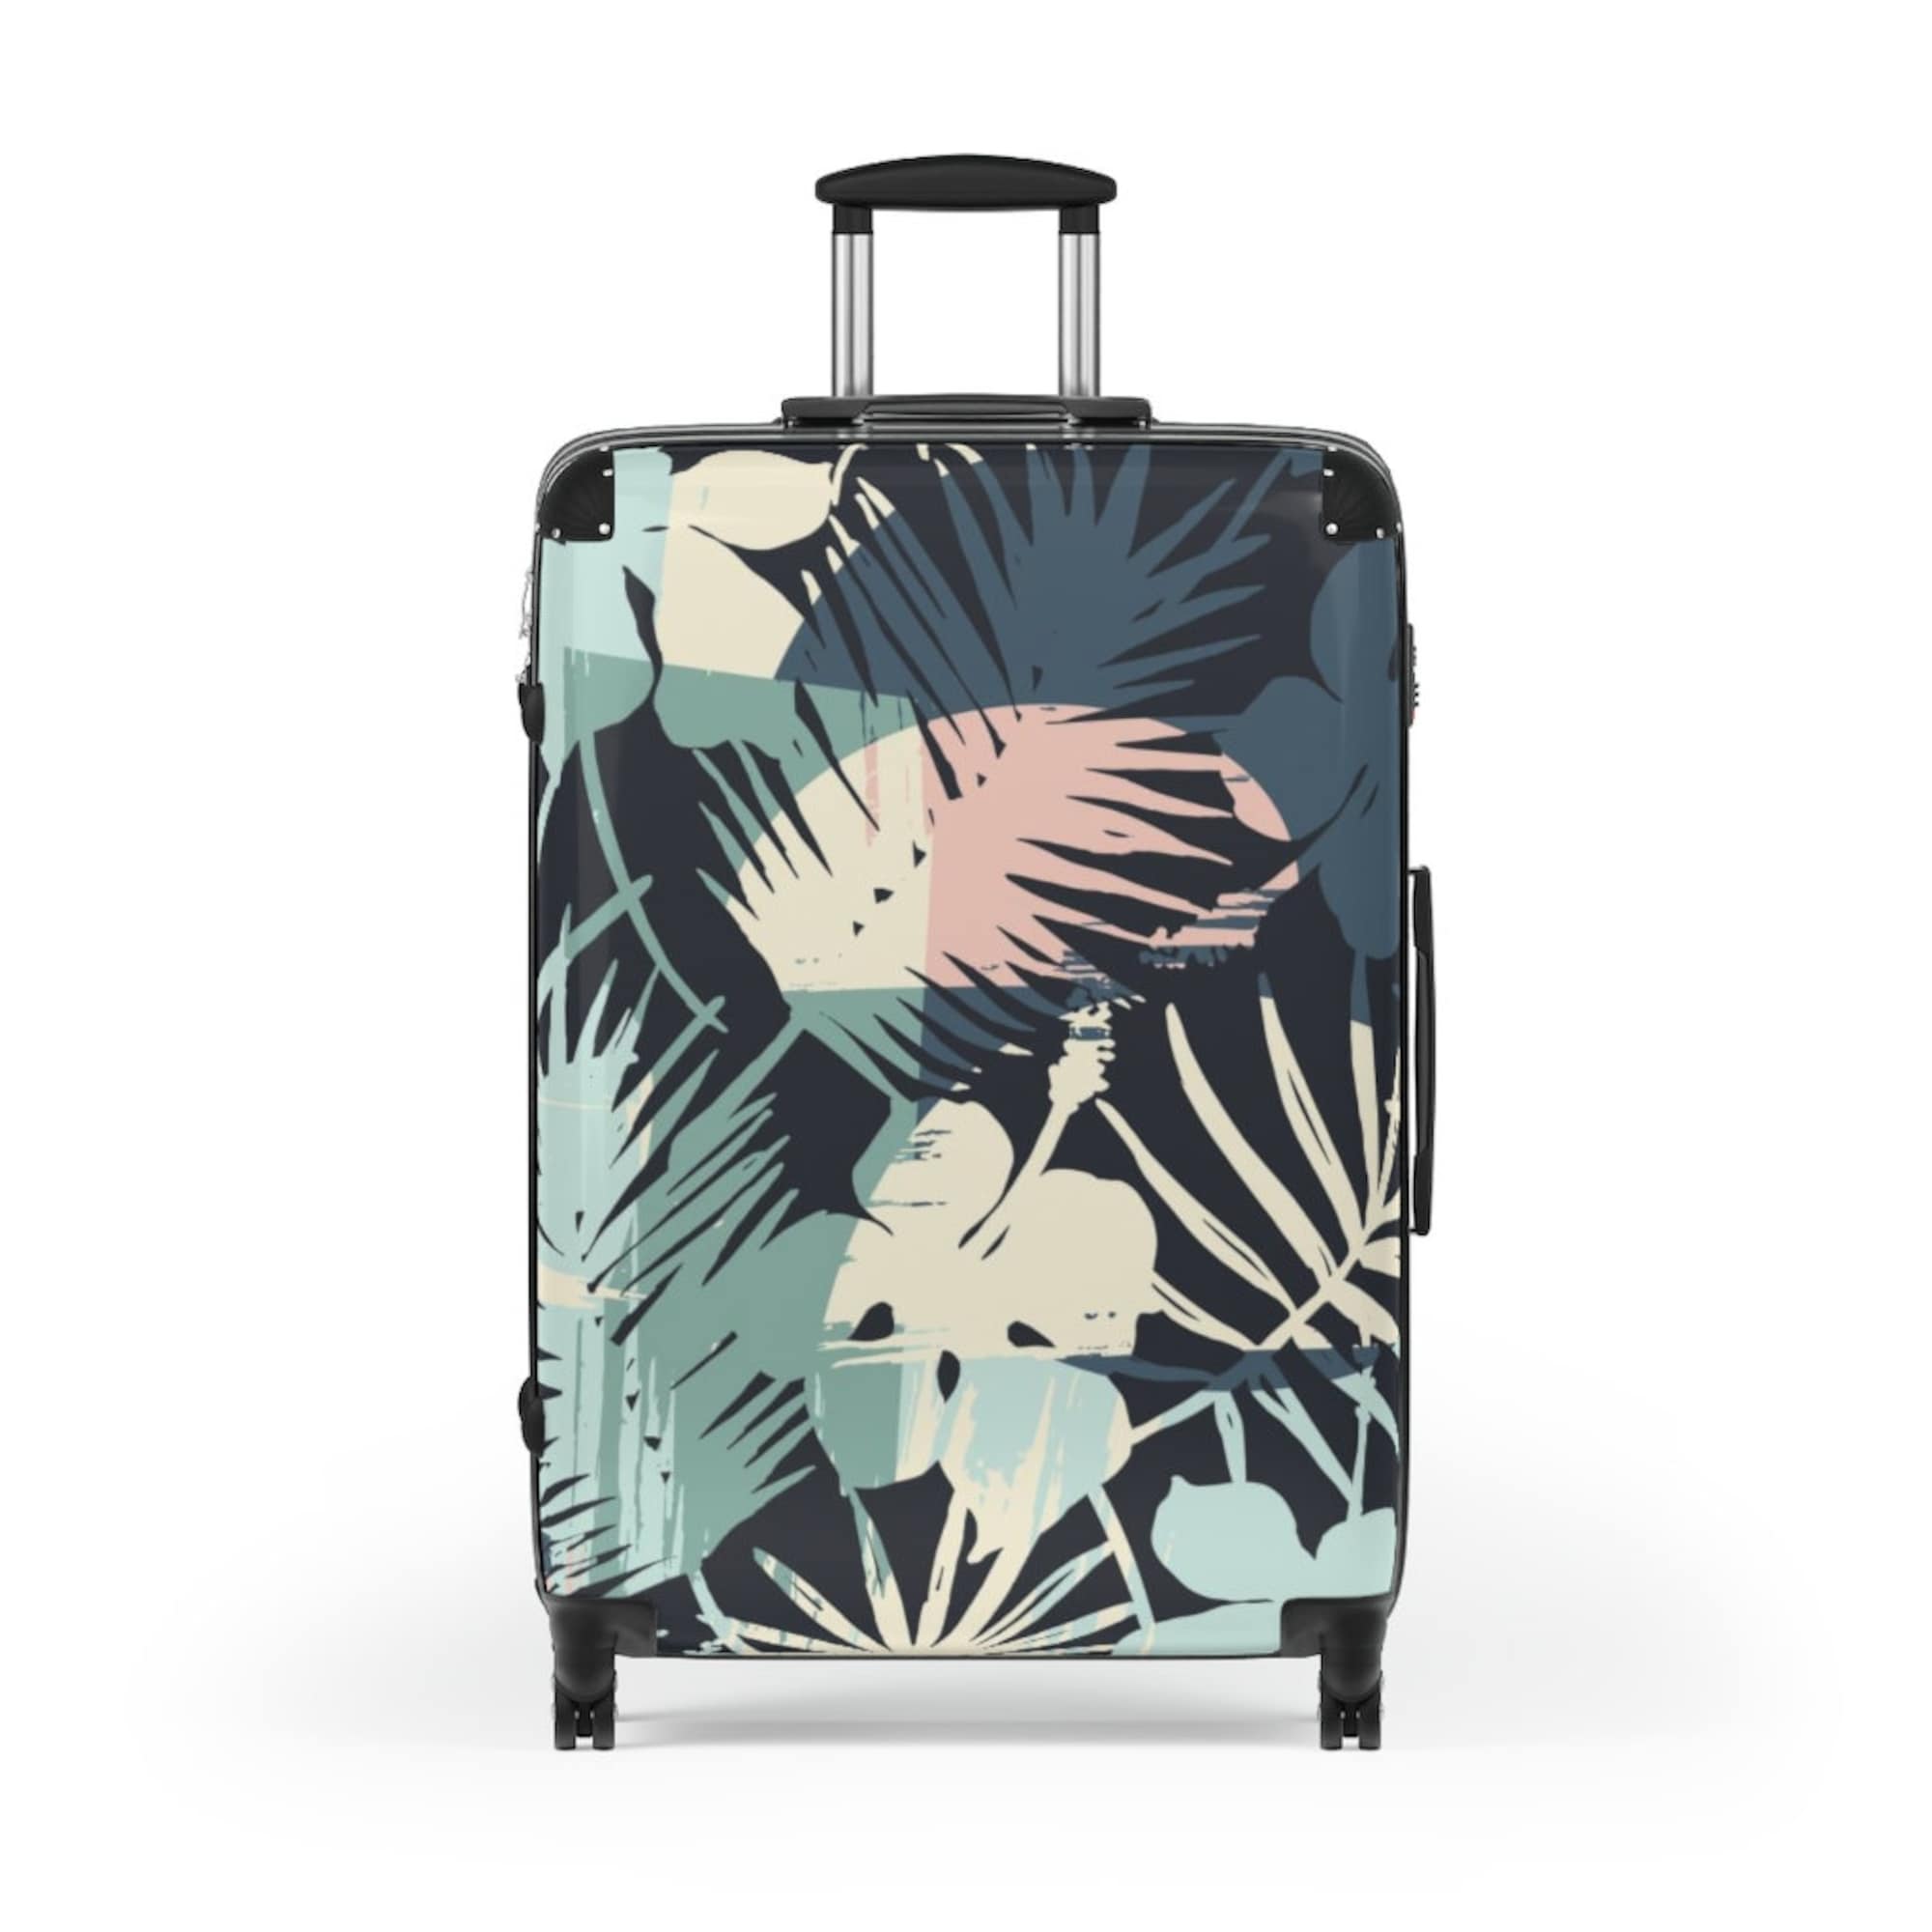 Discover The Cruise Suitcase